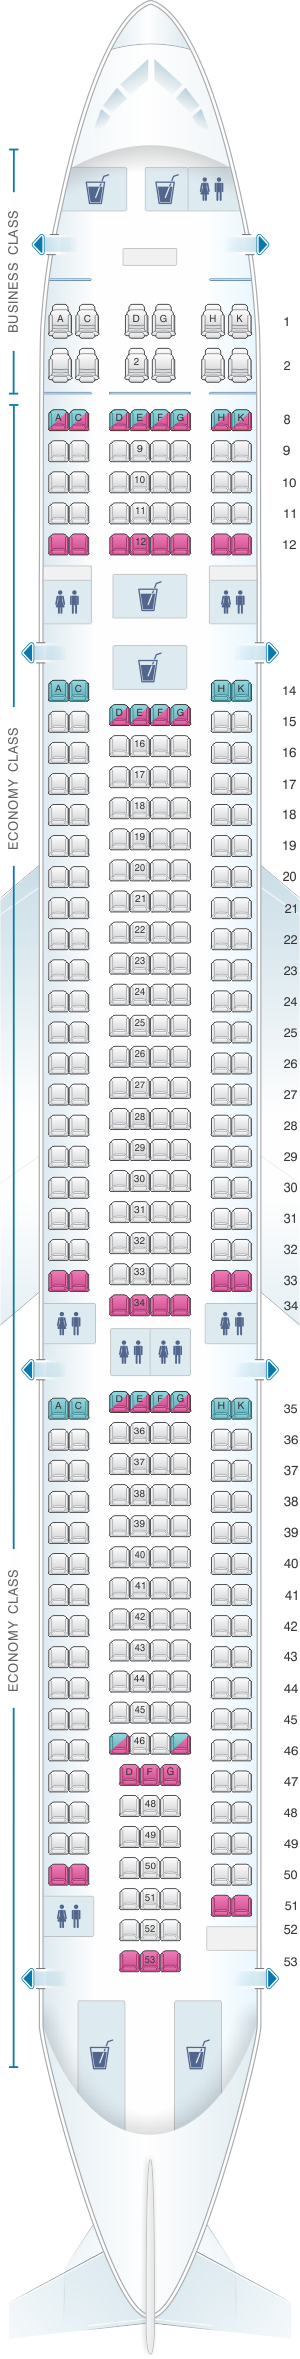 Seat Map Hi Fly Airbus A330 300 347pax | SeatMaestro